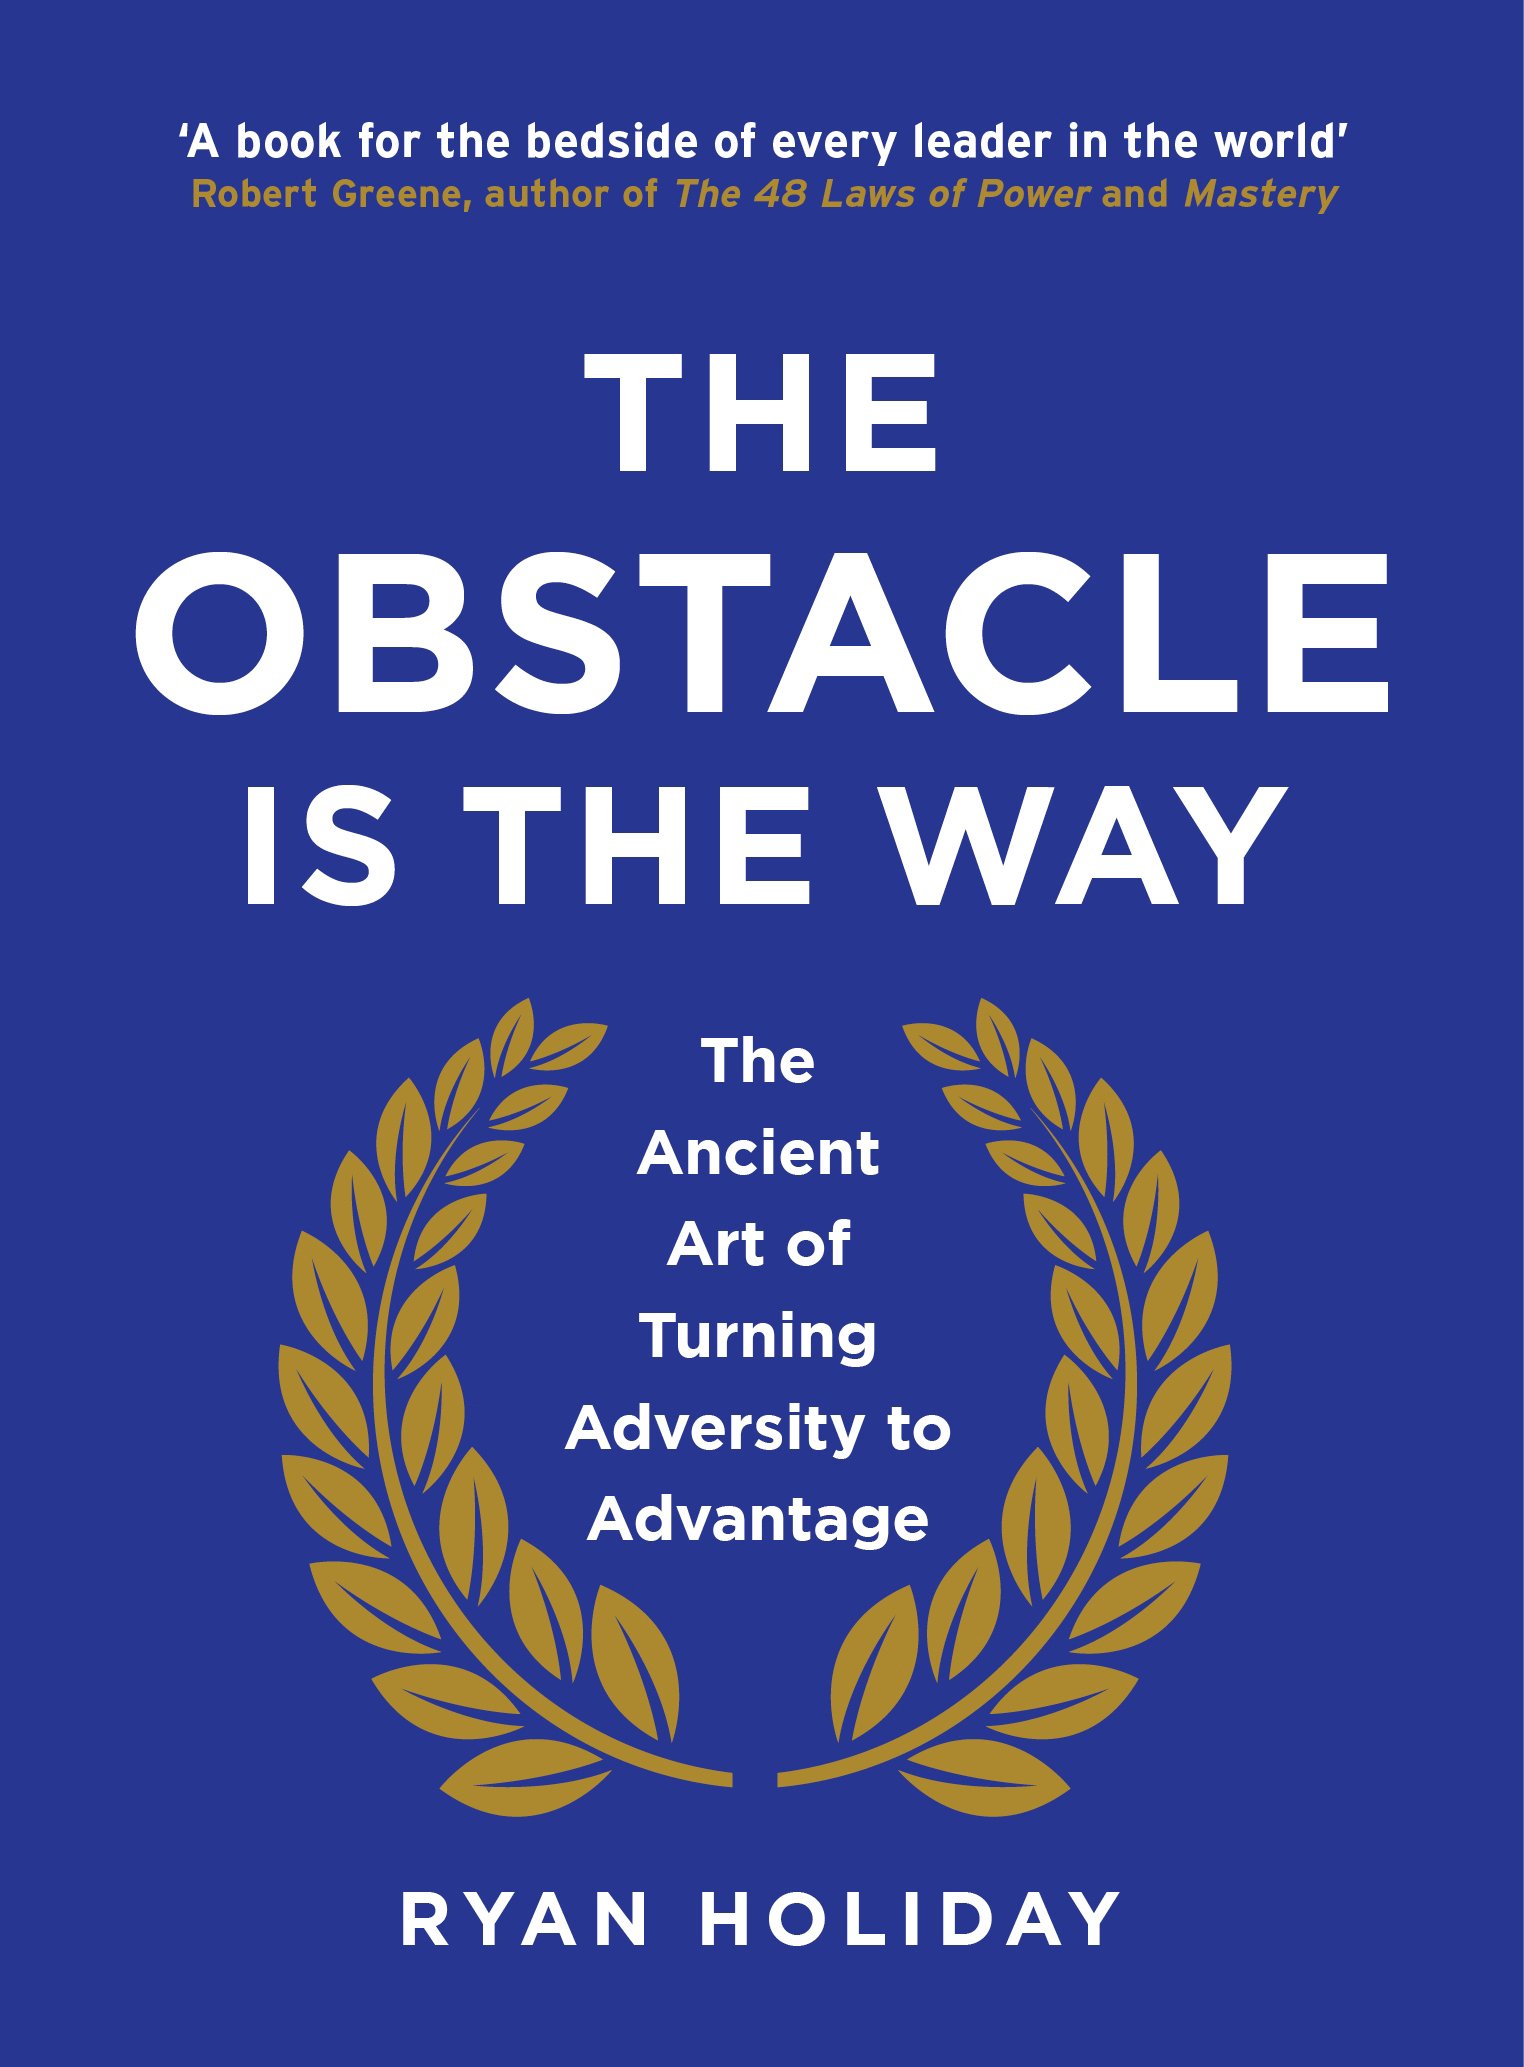 The Obstacle is the Way by Ryan Holiday